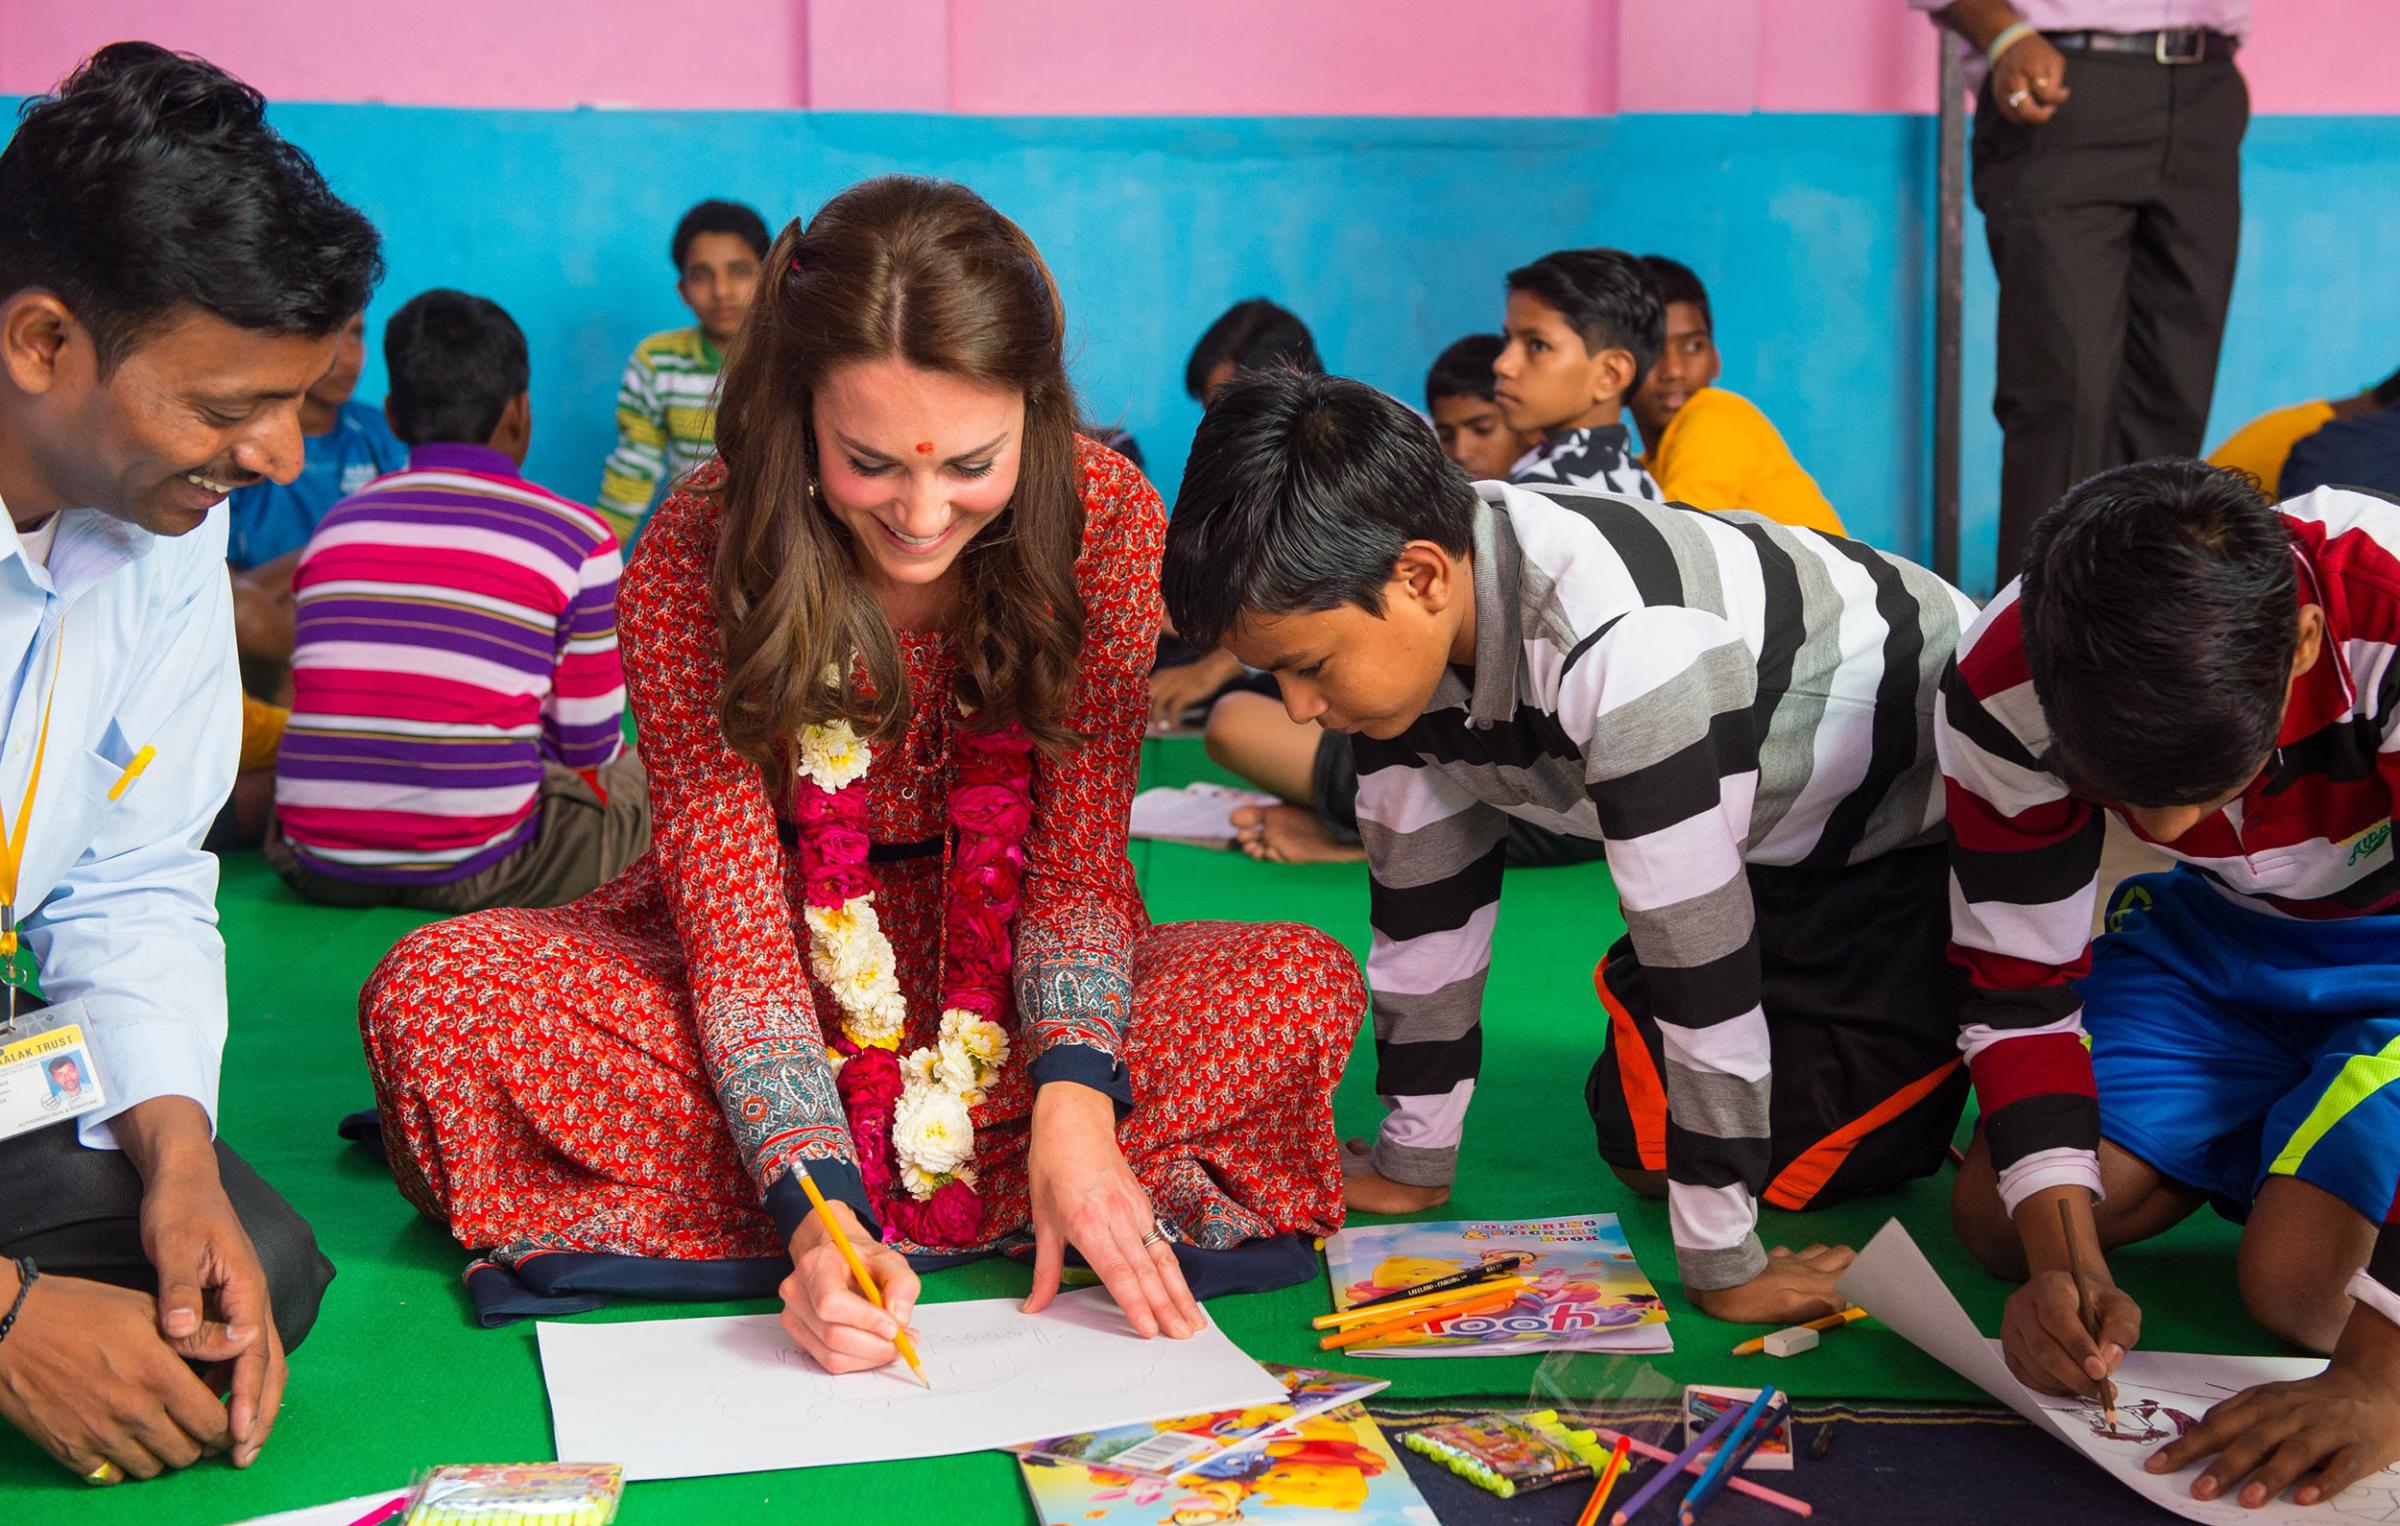 Catherine, Duchess of Cambridge participates in an arts class with street children at a contact centre run by the charity Salaam Baalak, which provides emergency help and long term support to homeless children at New Delhi railway station in New Dehli, India on April 12, 2016.